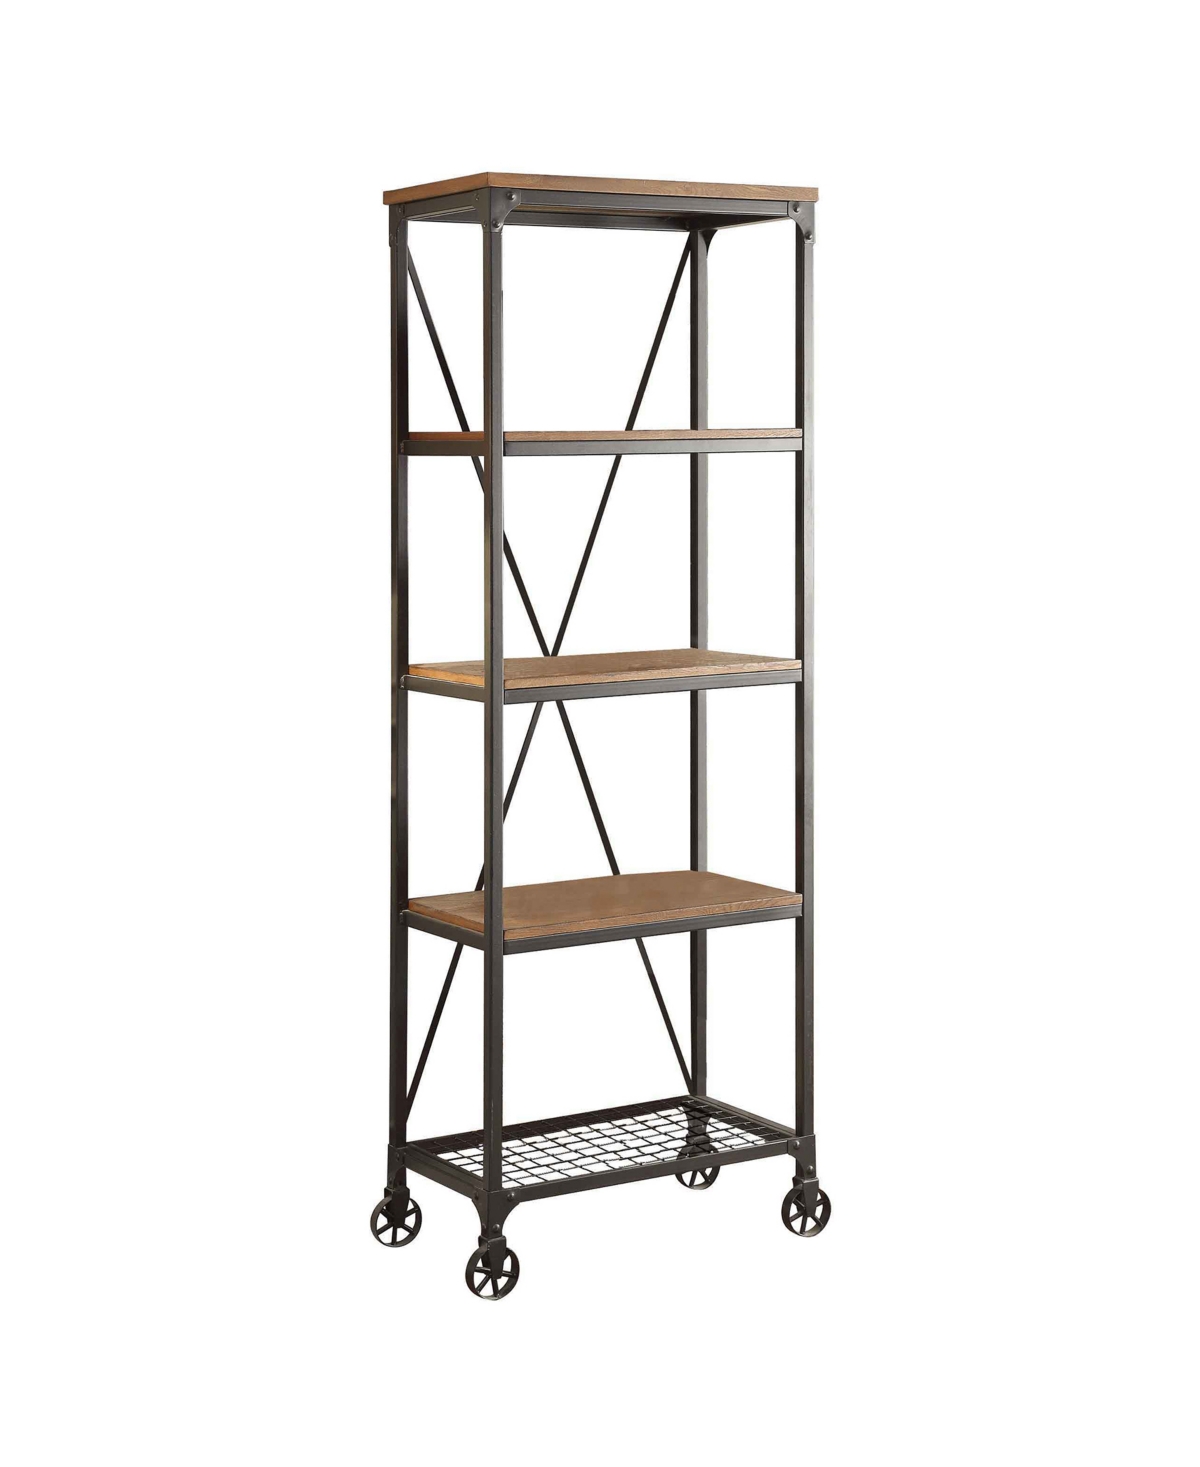 Furniture Thurmont 26"w Bookshelf In -tone Finish- Weathered Natural And Rust